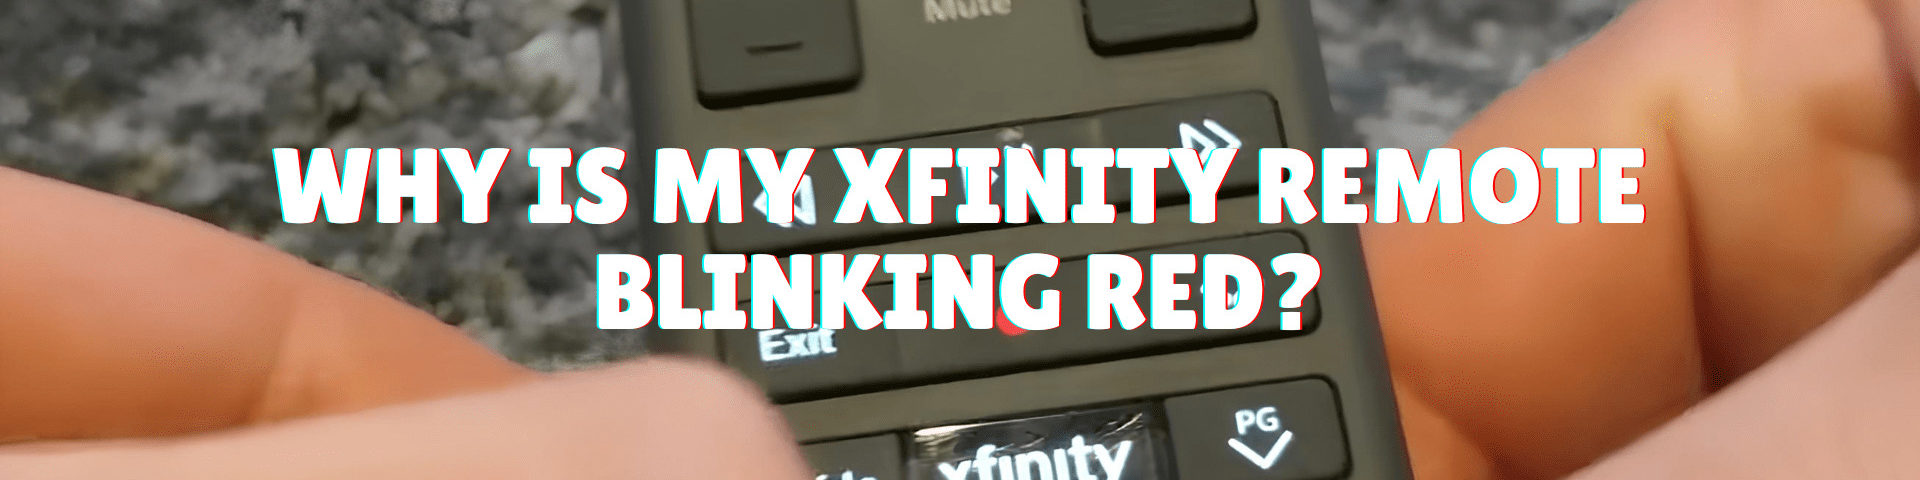 why is my xfinity remote blinking red